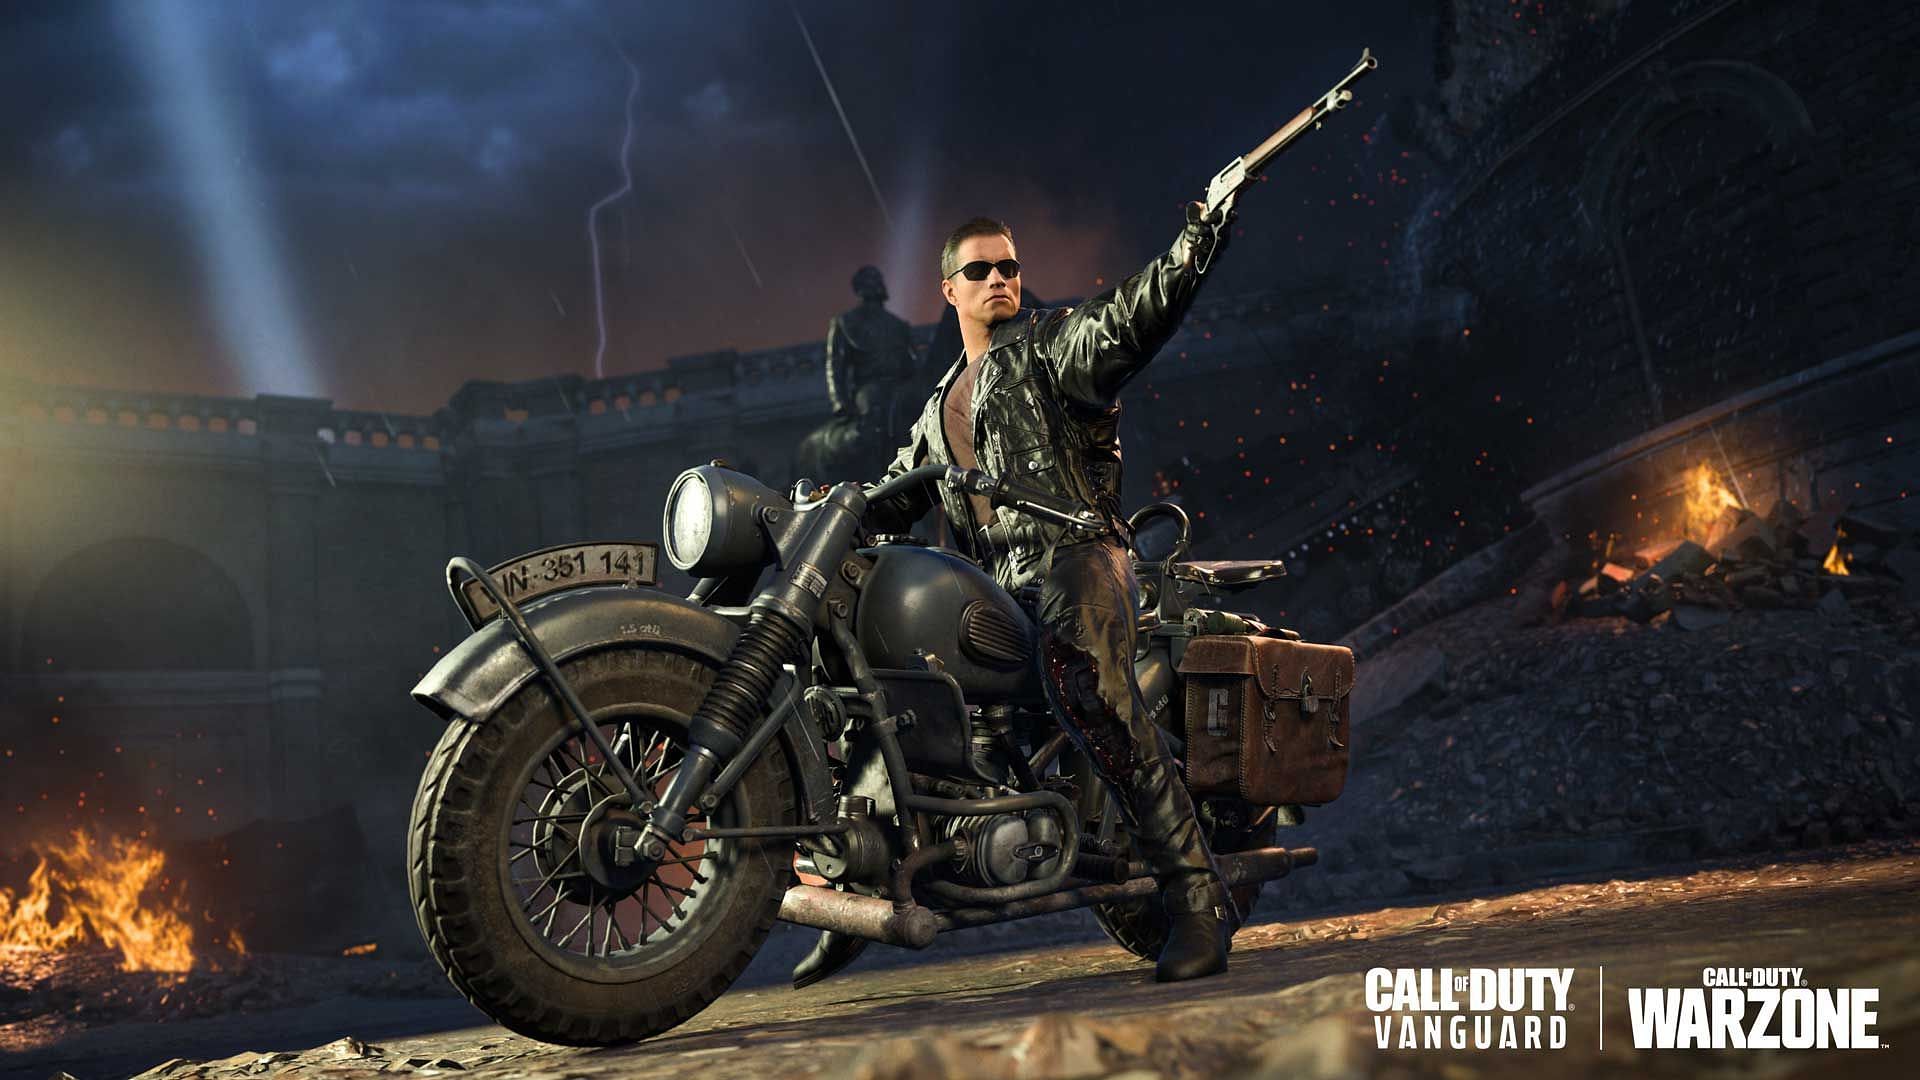 The Terminator T-800 in Call Of Duty: Vanguard (Image via Activision)